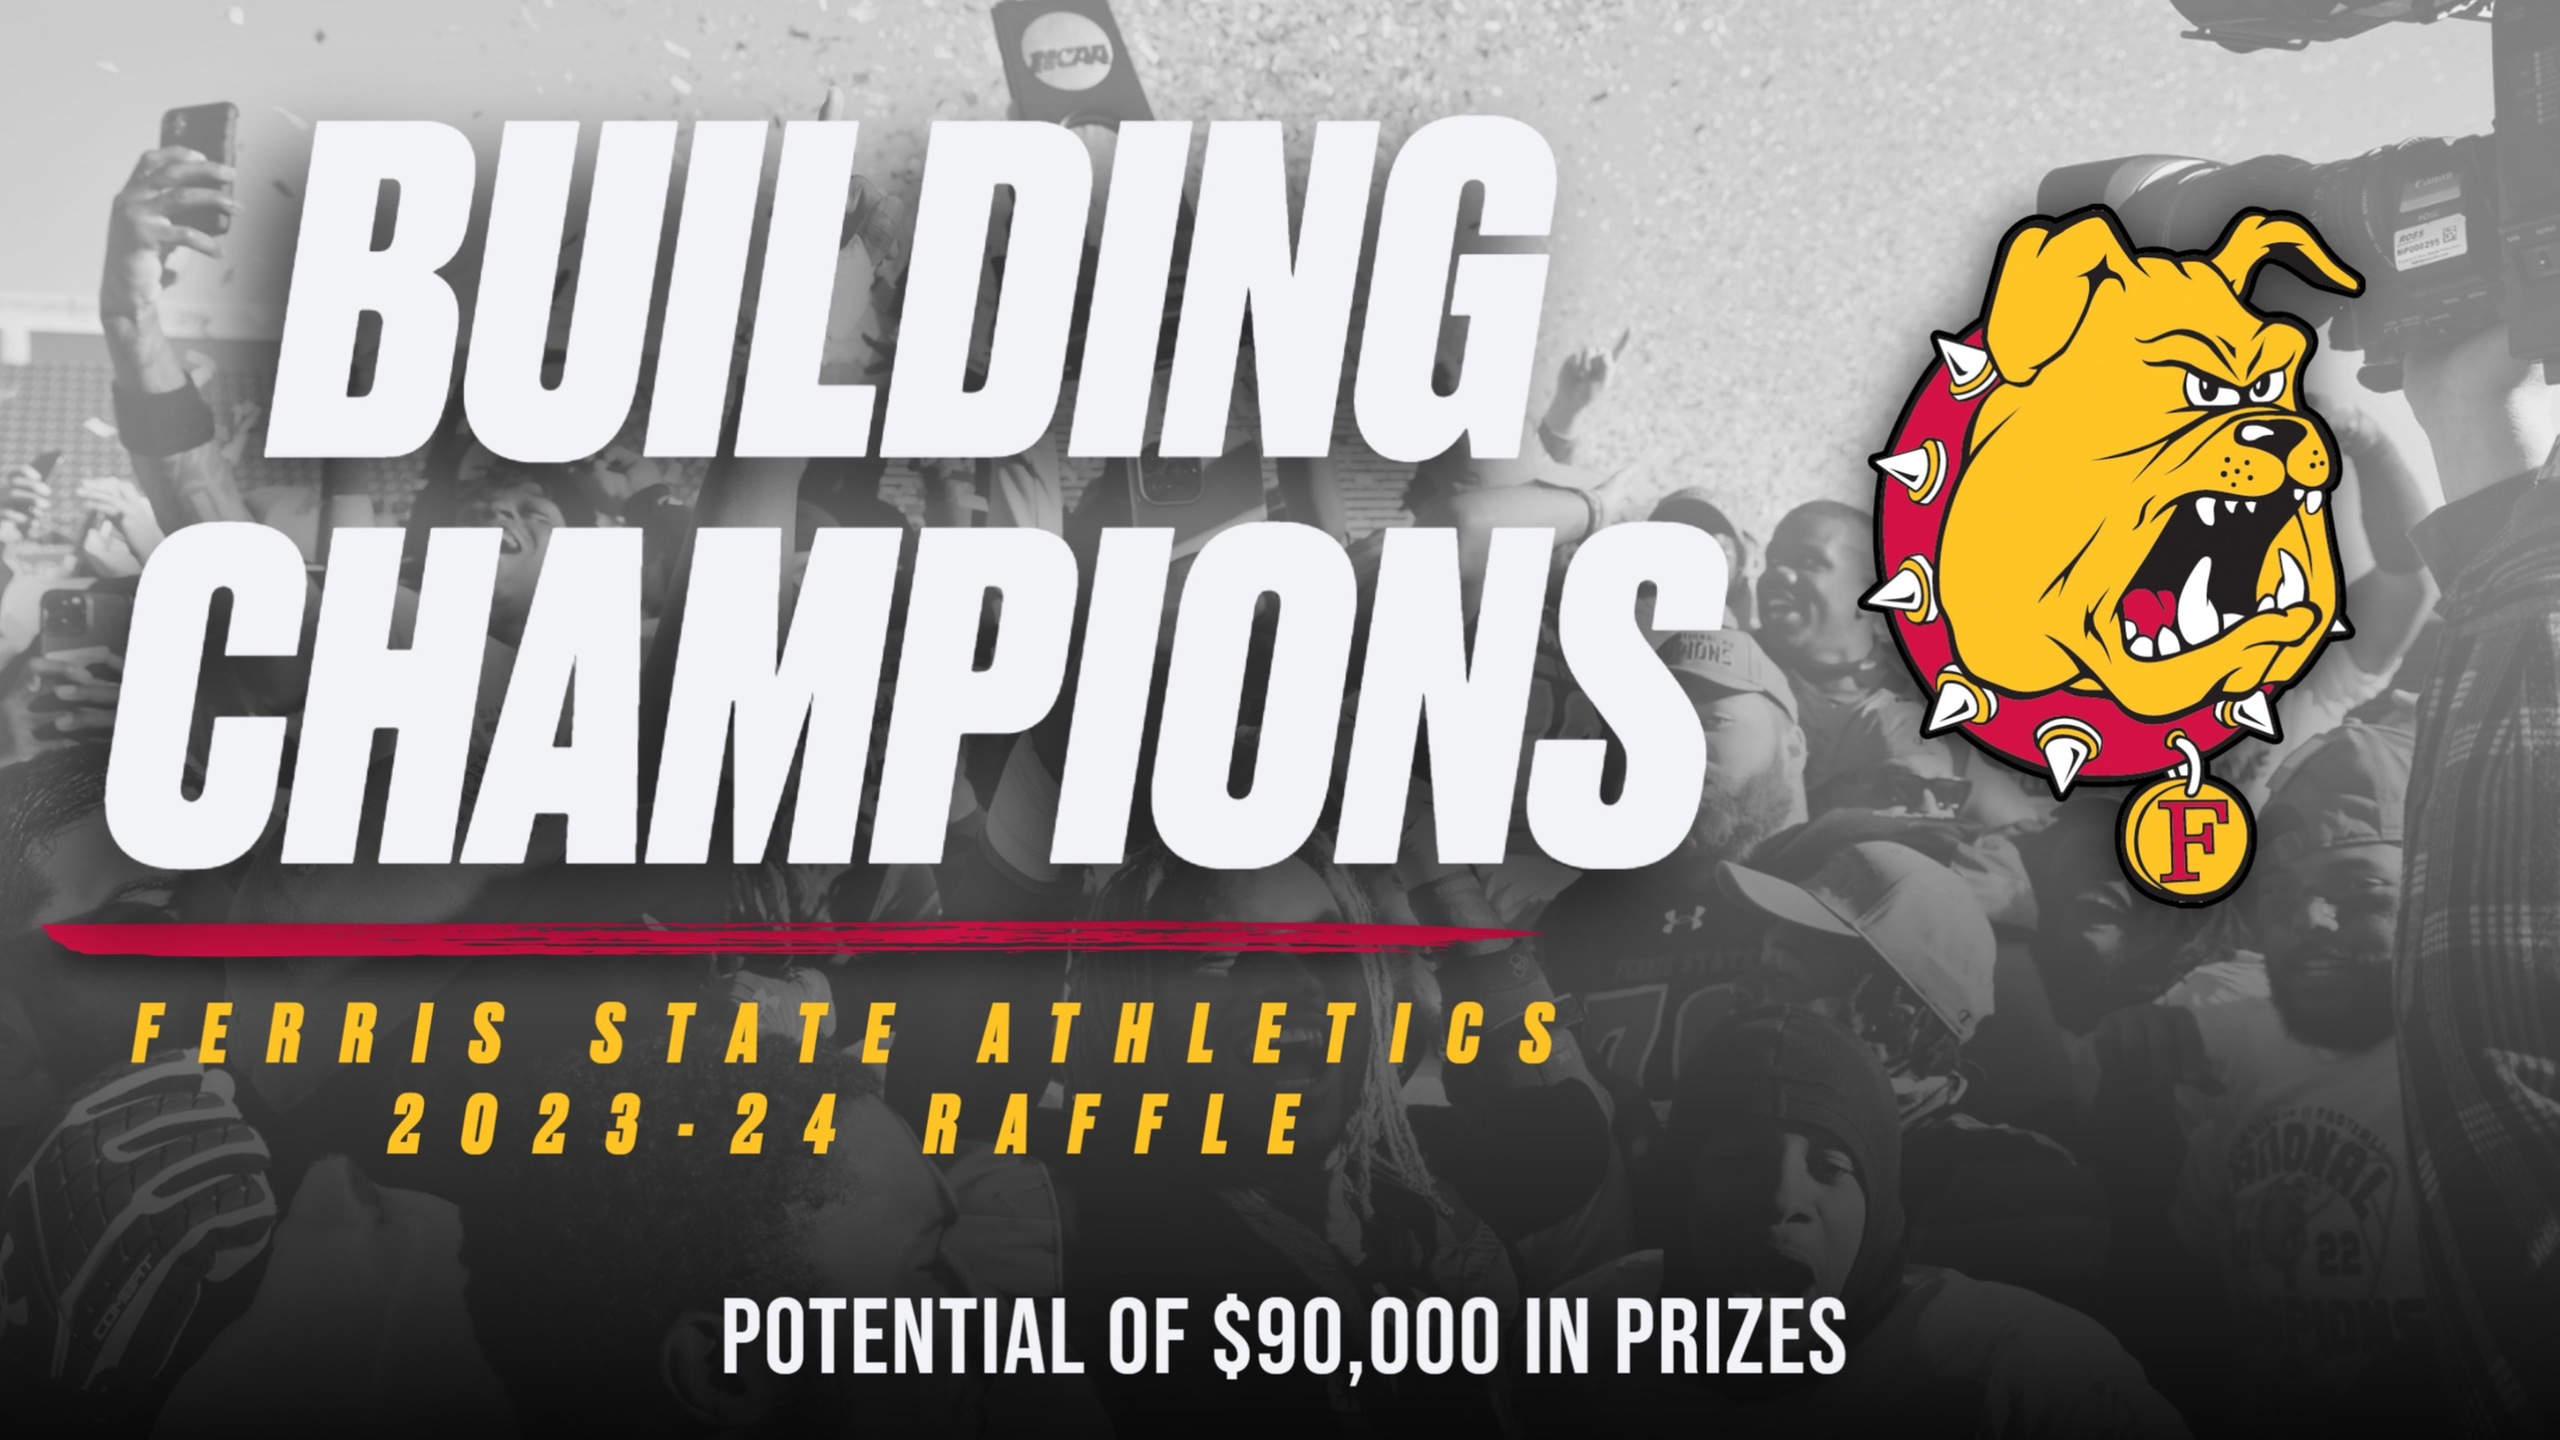 Purchase Your Building Champions Raffle Ticket Today!